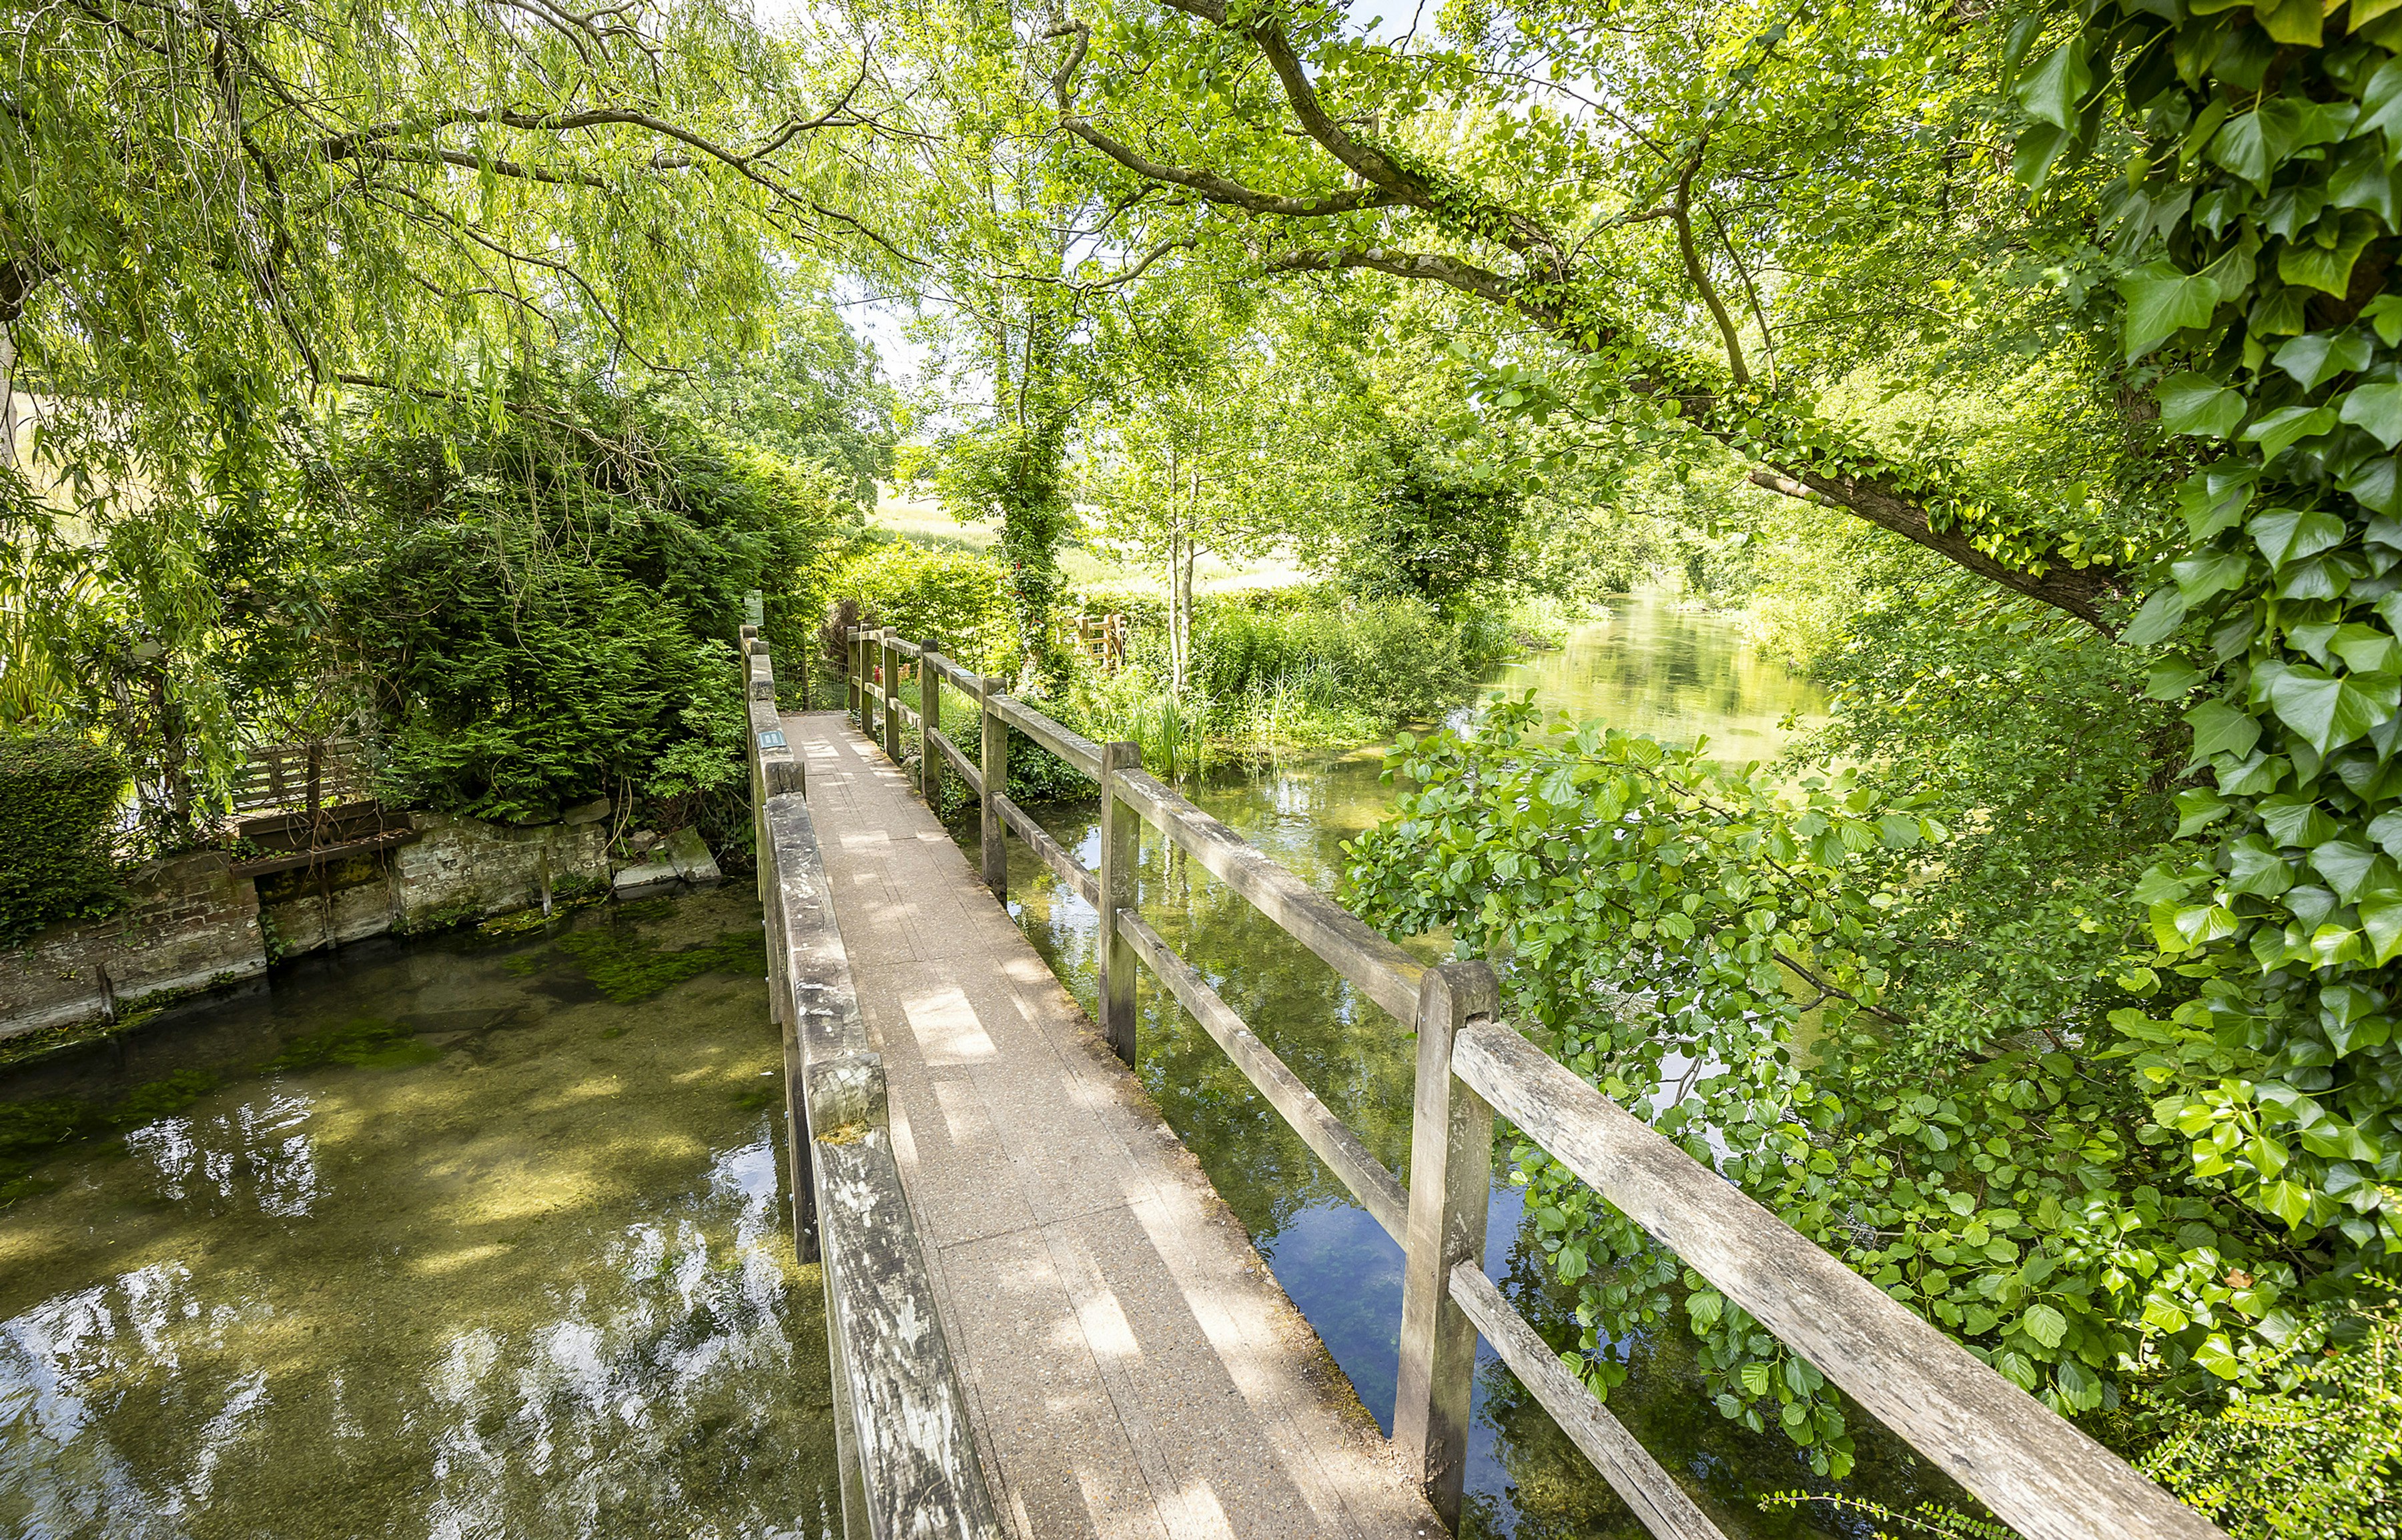 A wooden bridge over a river. Surrounded by trees.